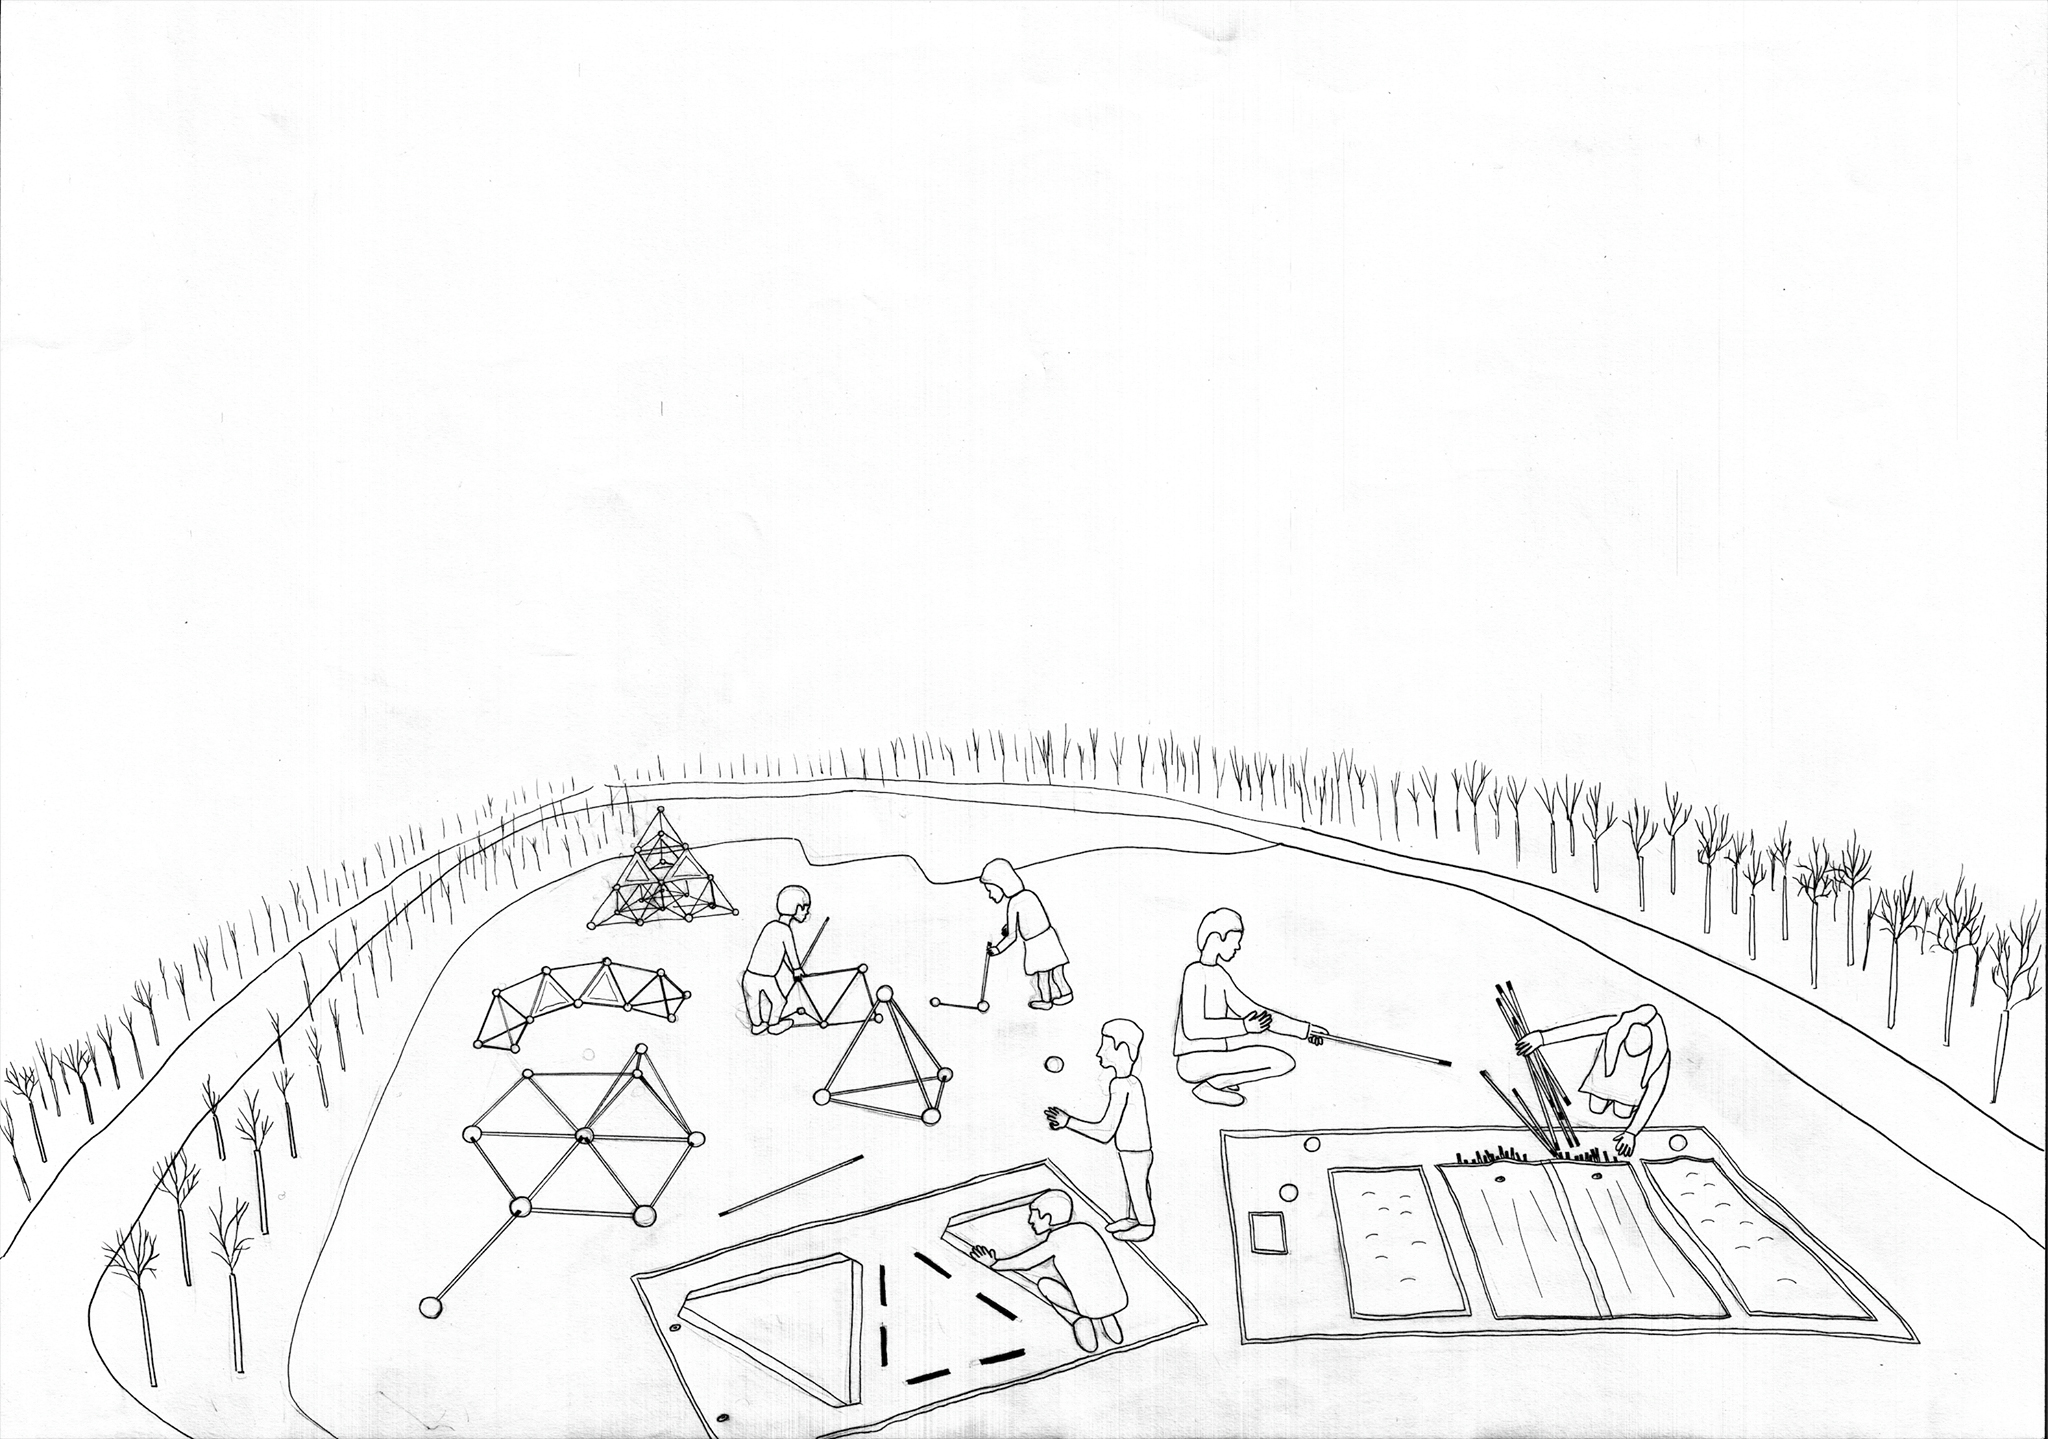 Hosea Lau  drawing of children on site